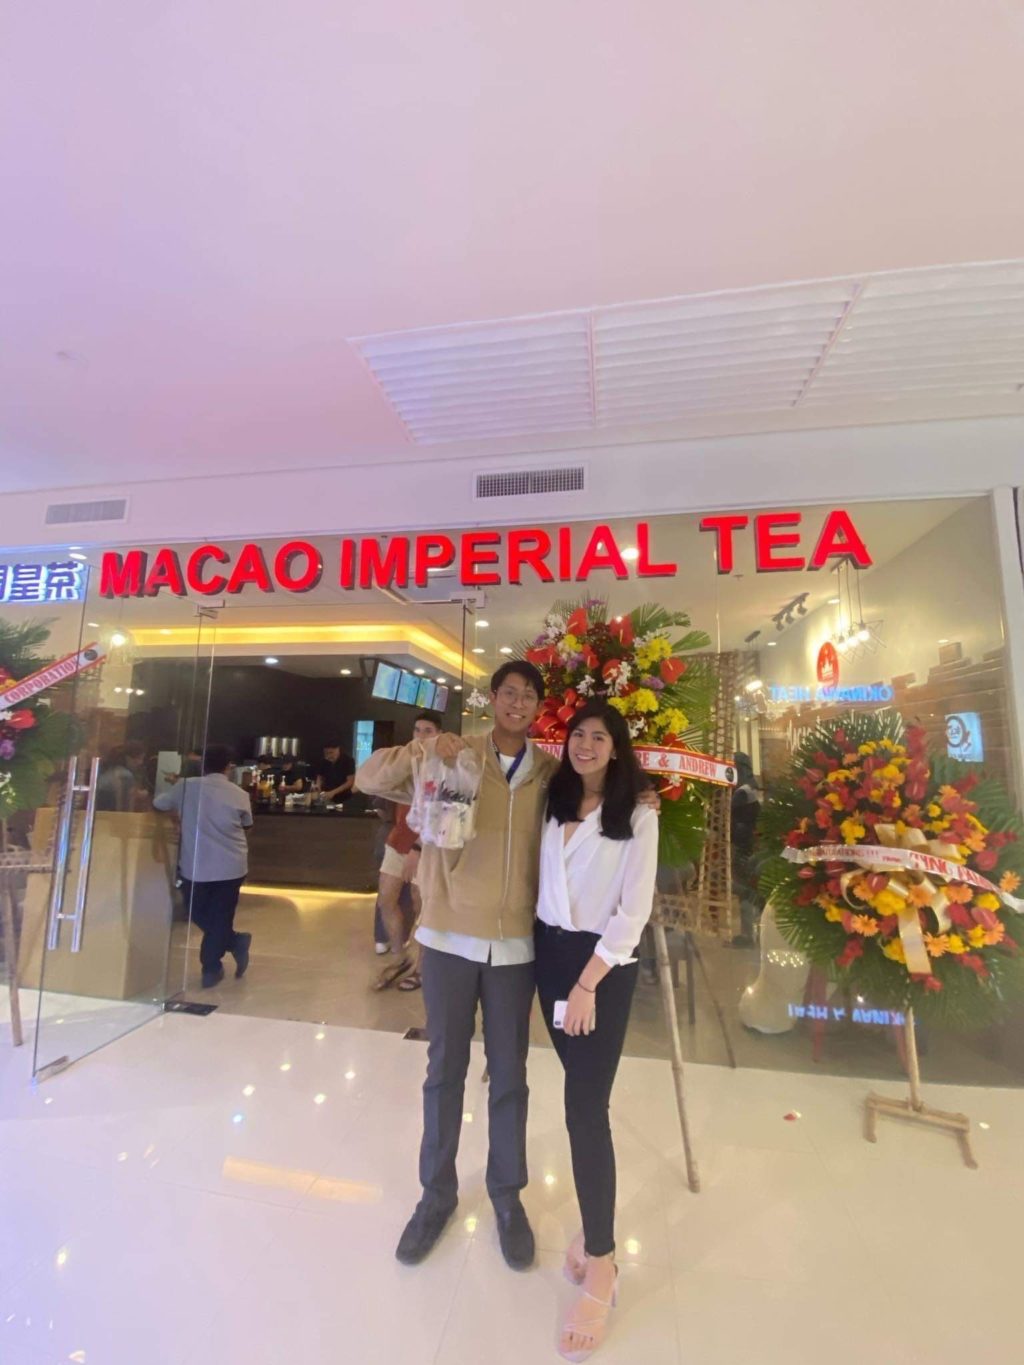 A picture of Mary Rose G. Dakay, CEO of Macao Imperial Tea.